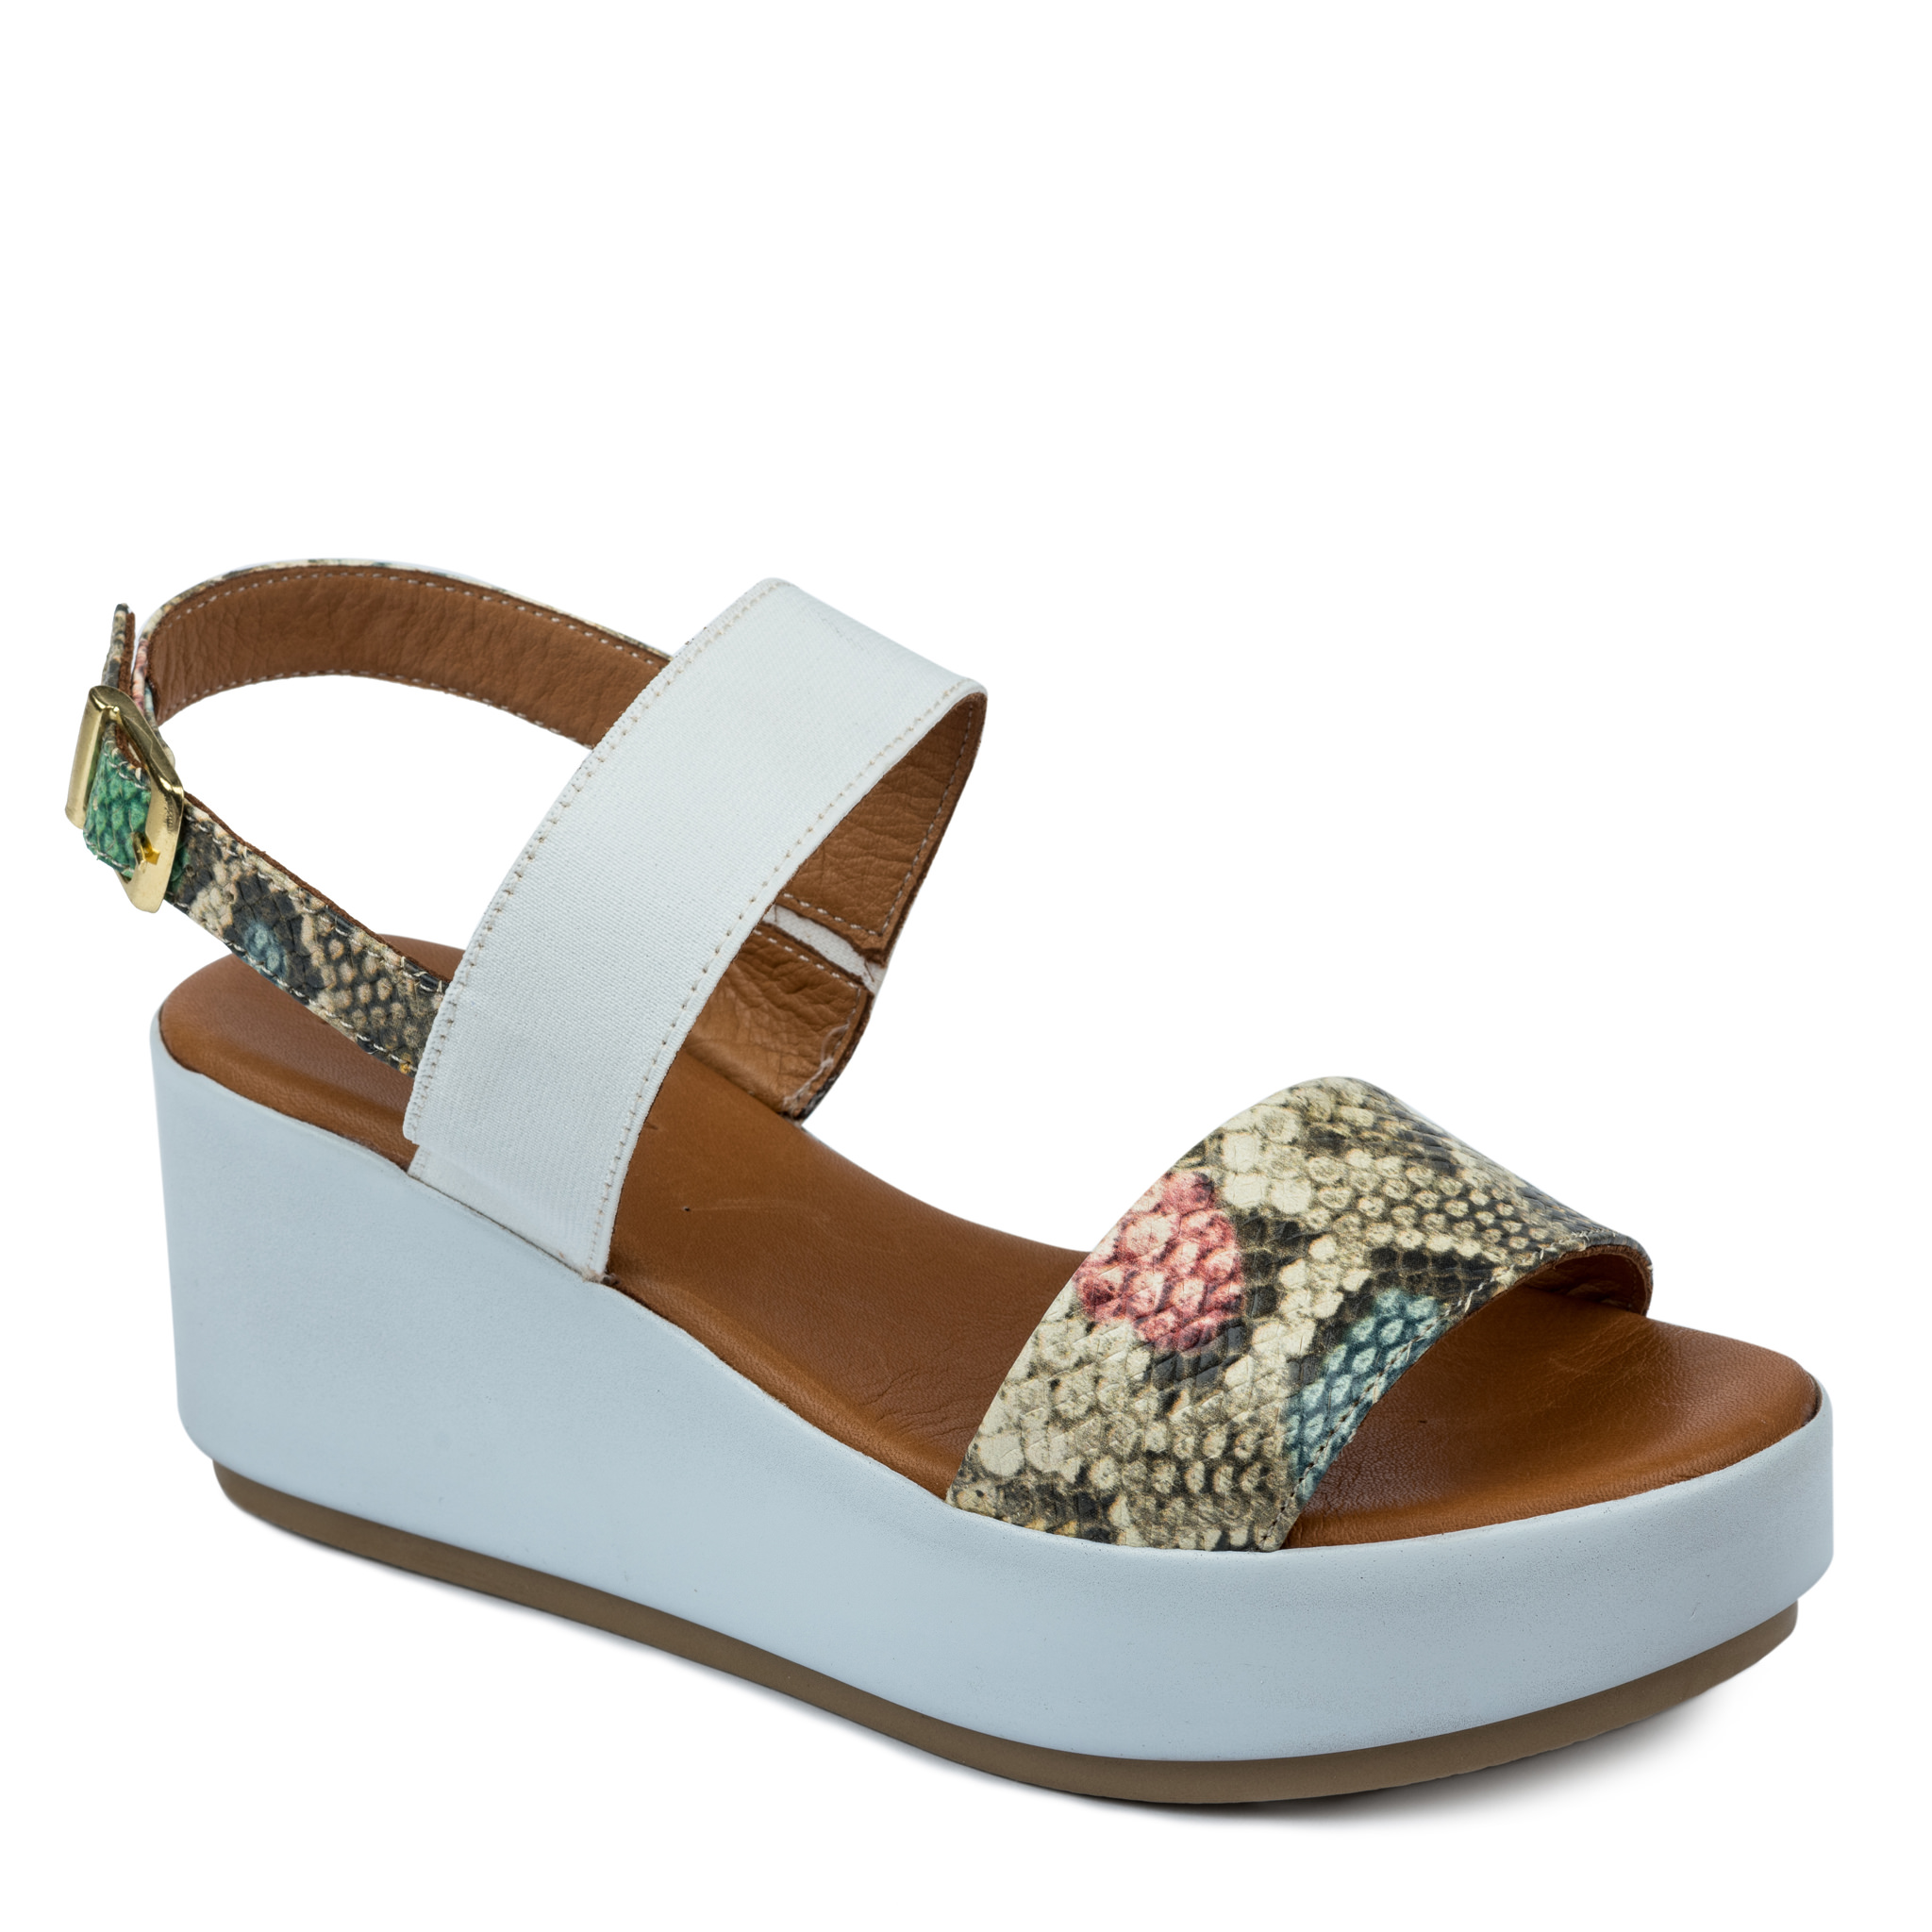 Leather sandals A604 - BEIGE